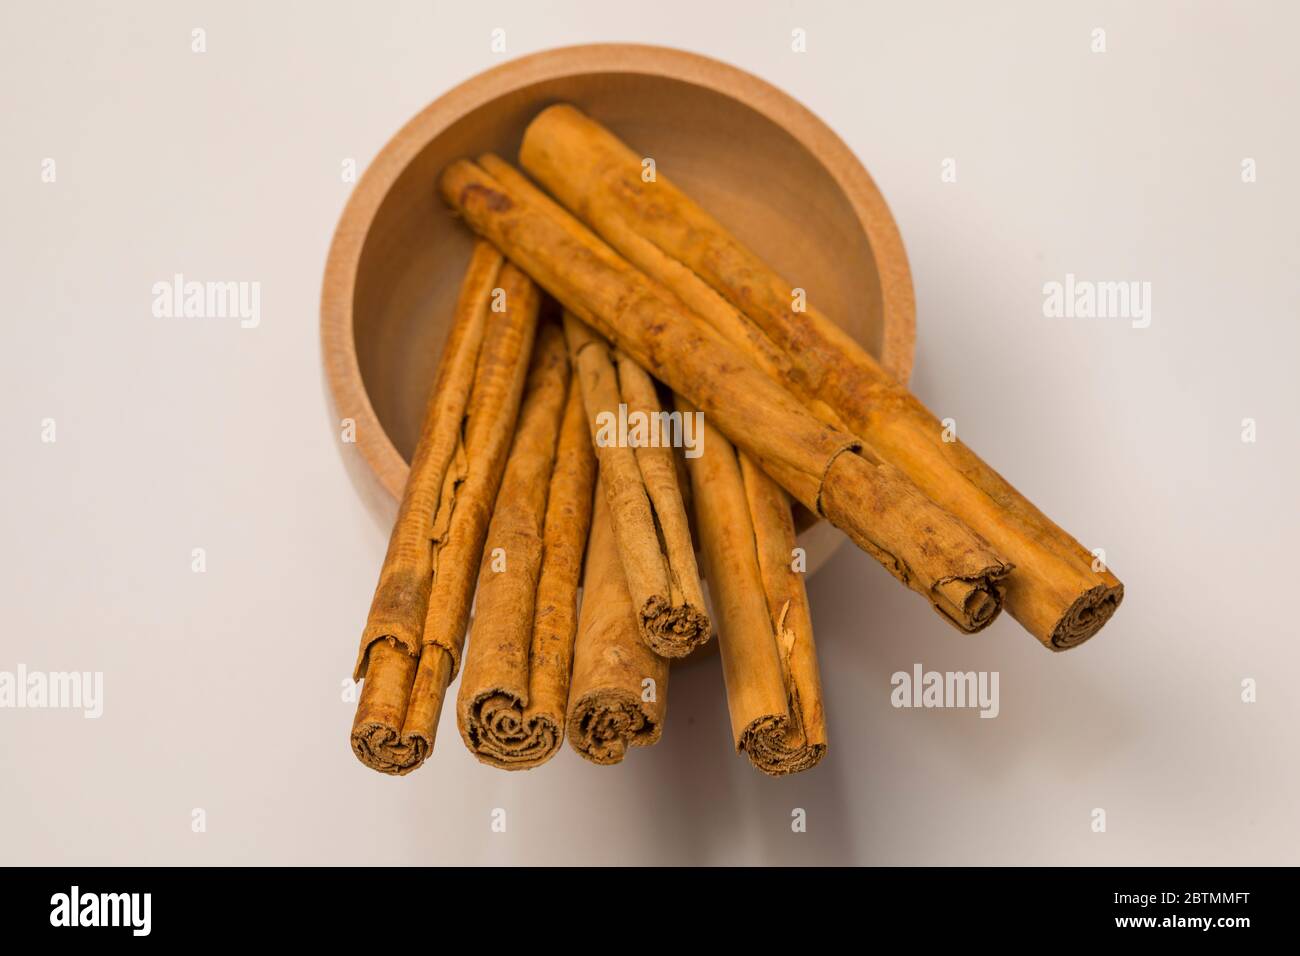 Close-up view of cinnamon sticks on white background. Stock Photo